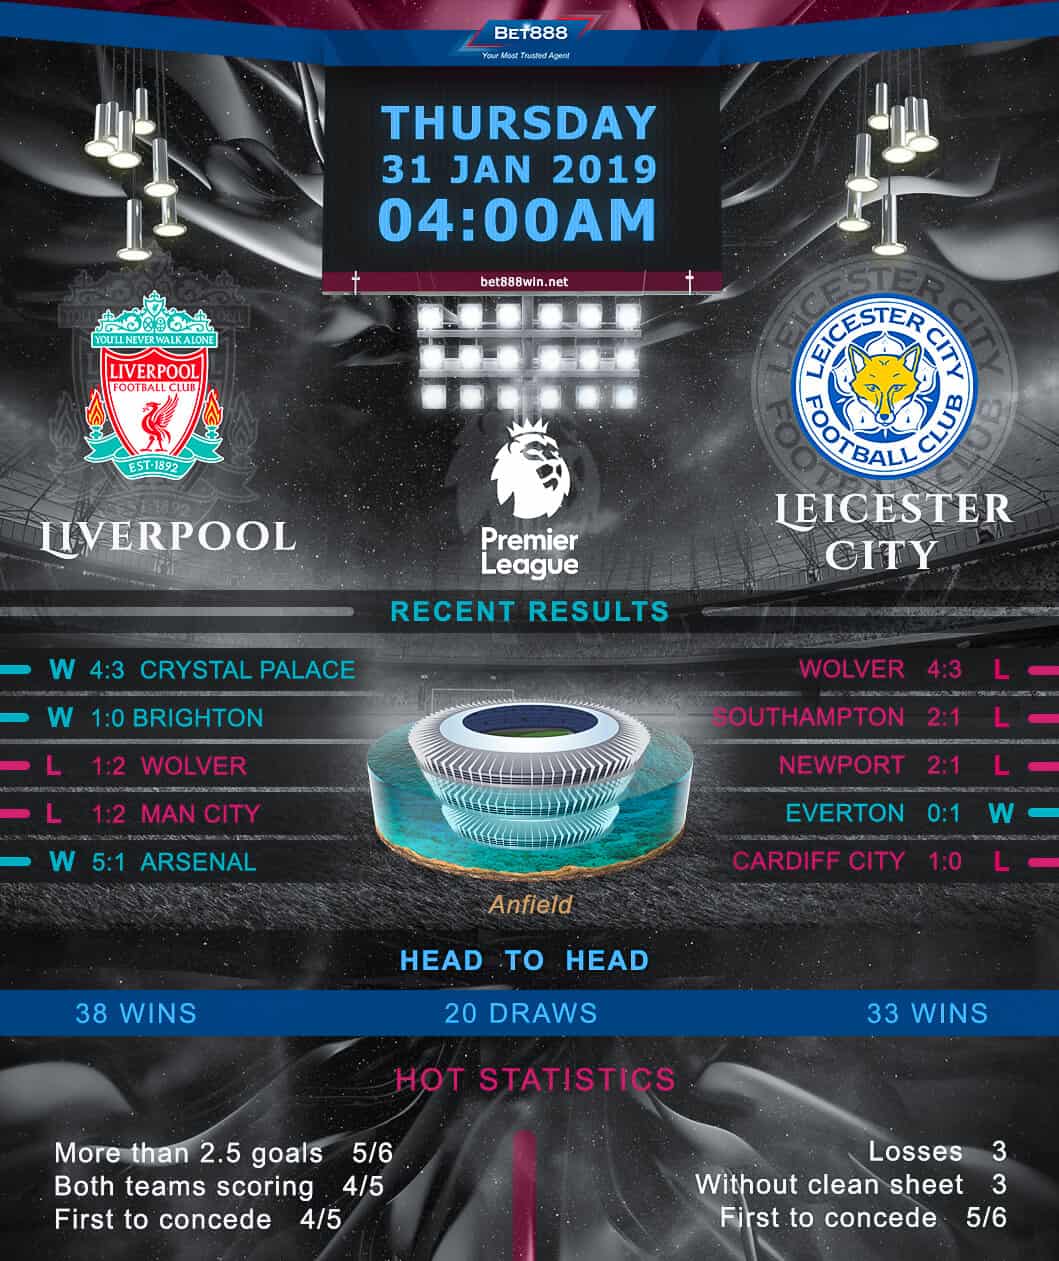 Liverpool vs Leicester City﻿ 31/01/19